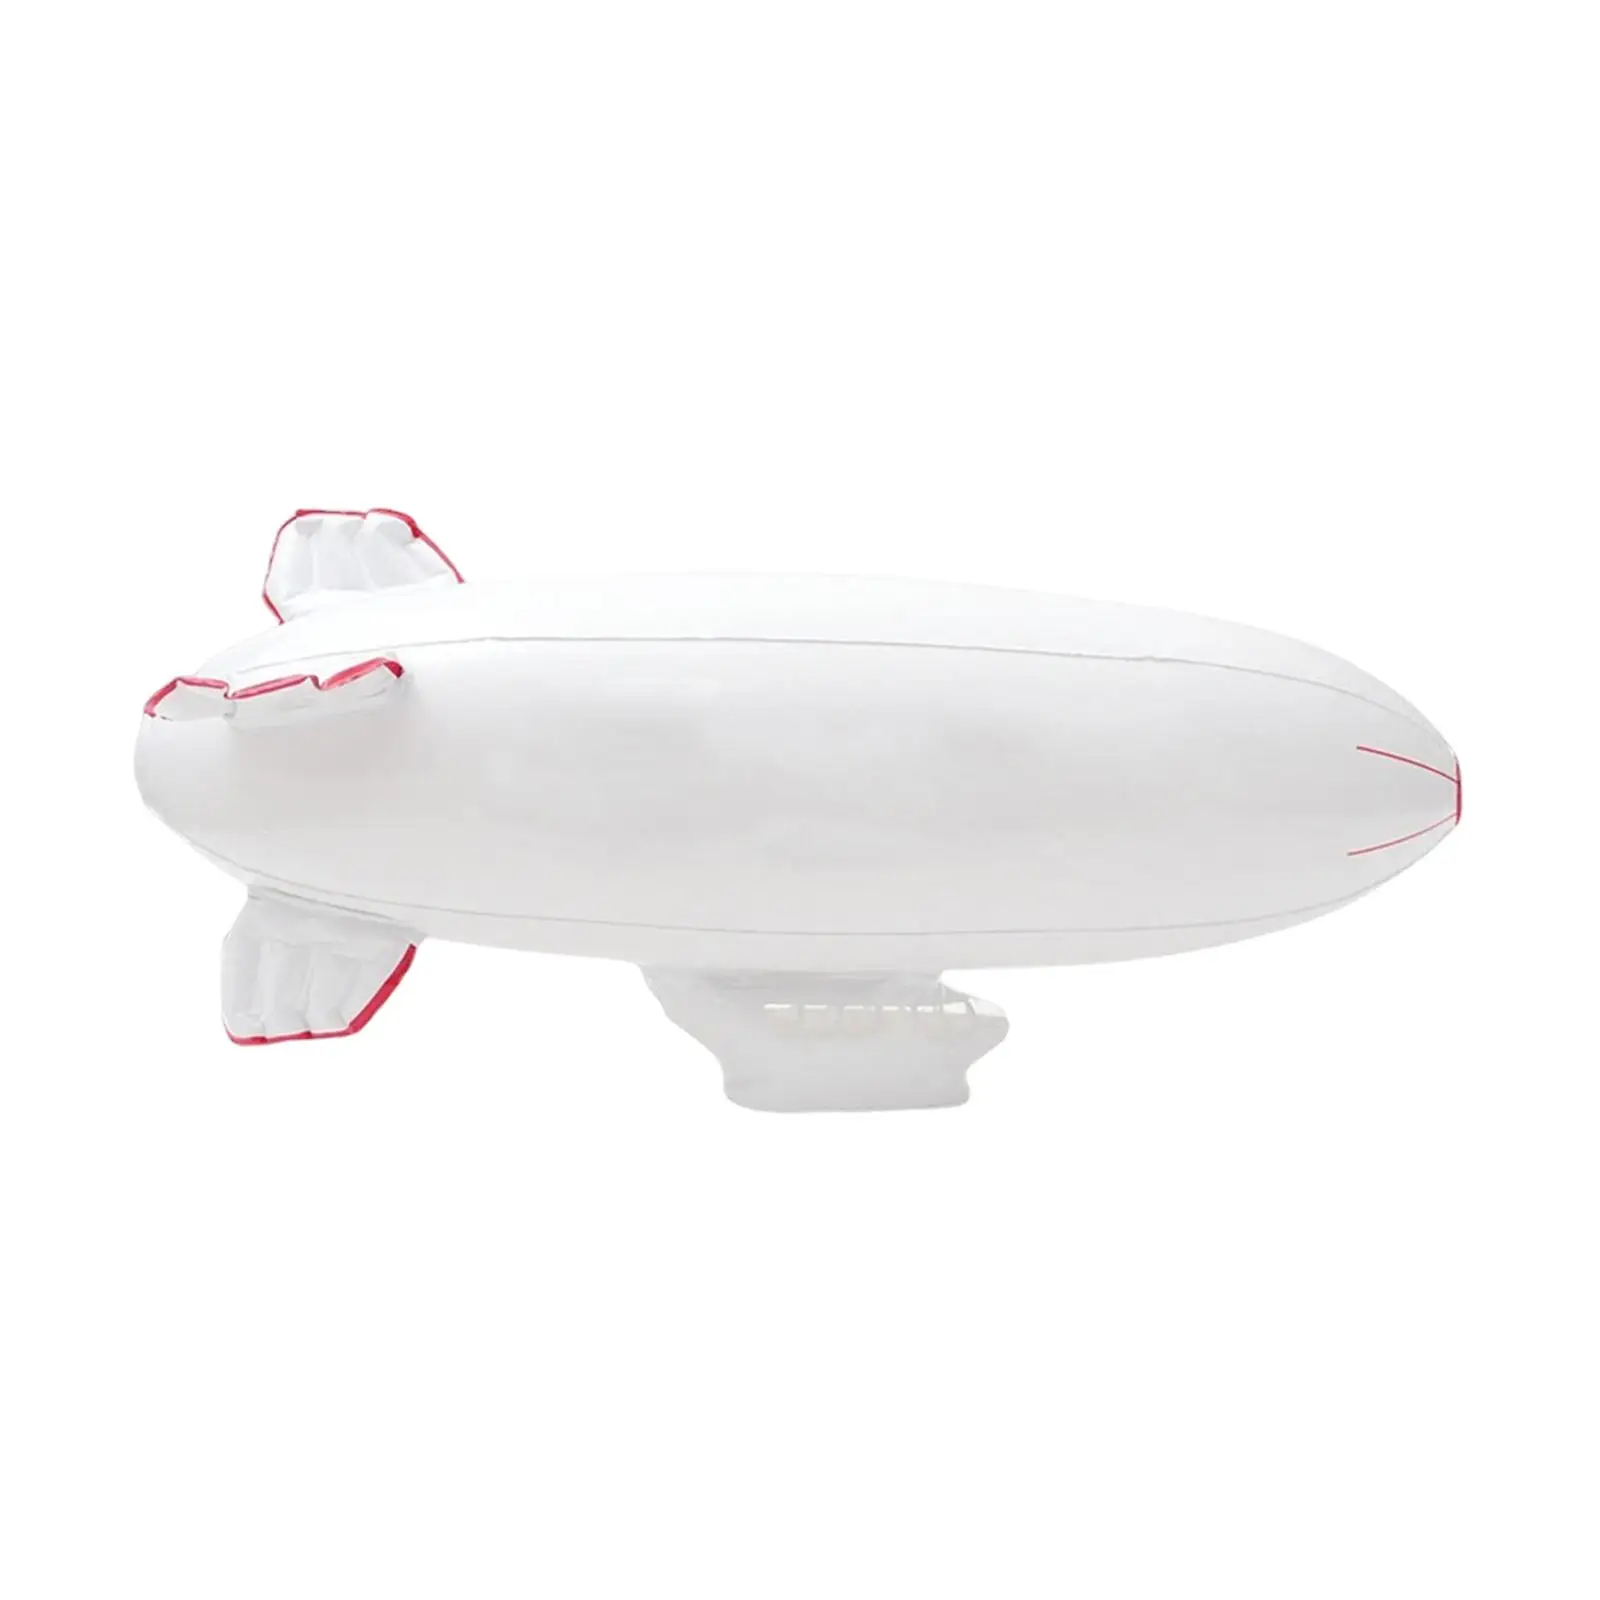 Nflatable Toy Smooth Surface Reusable Small Size Easy to Carry Spaceship Model PVC for Celebration Wedding Theme Party Decor